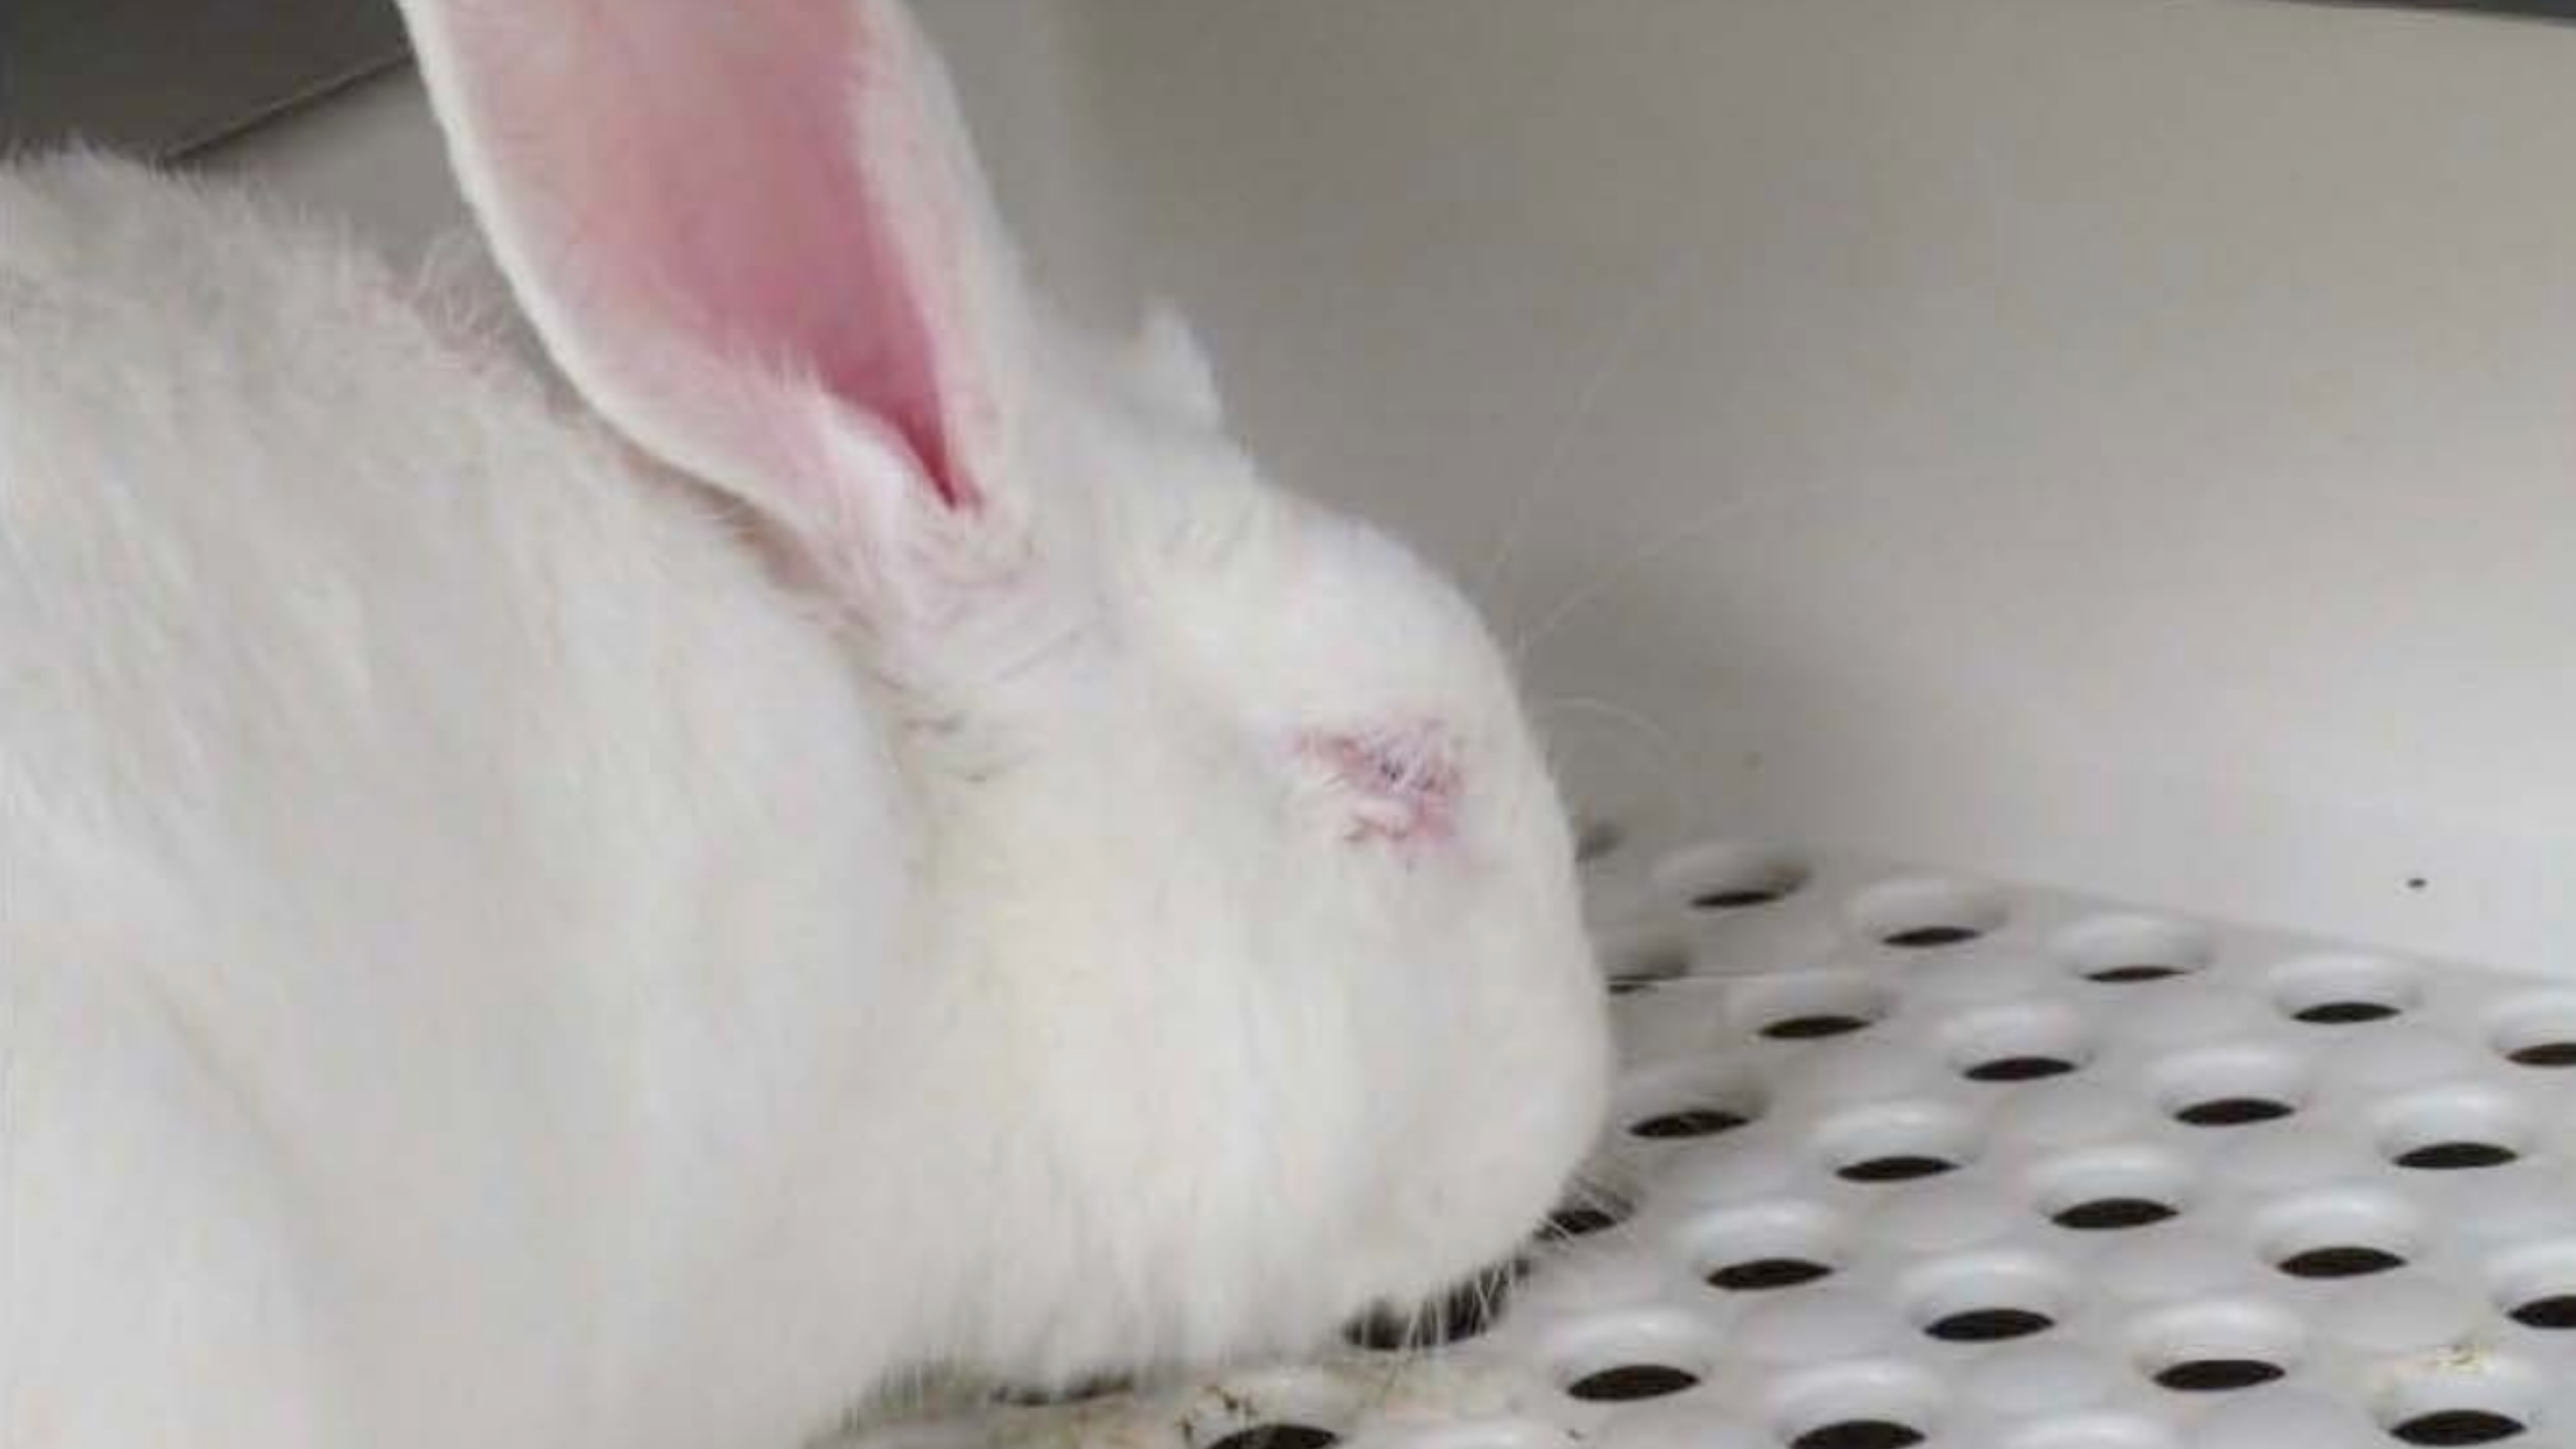 A white rabbit with a swollen-shut, pink eye visible, cowers in a white plastic cage